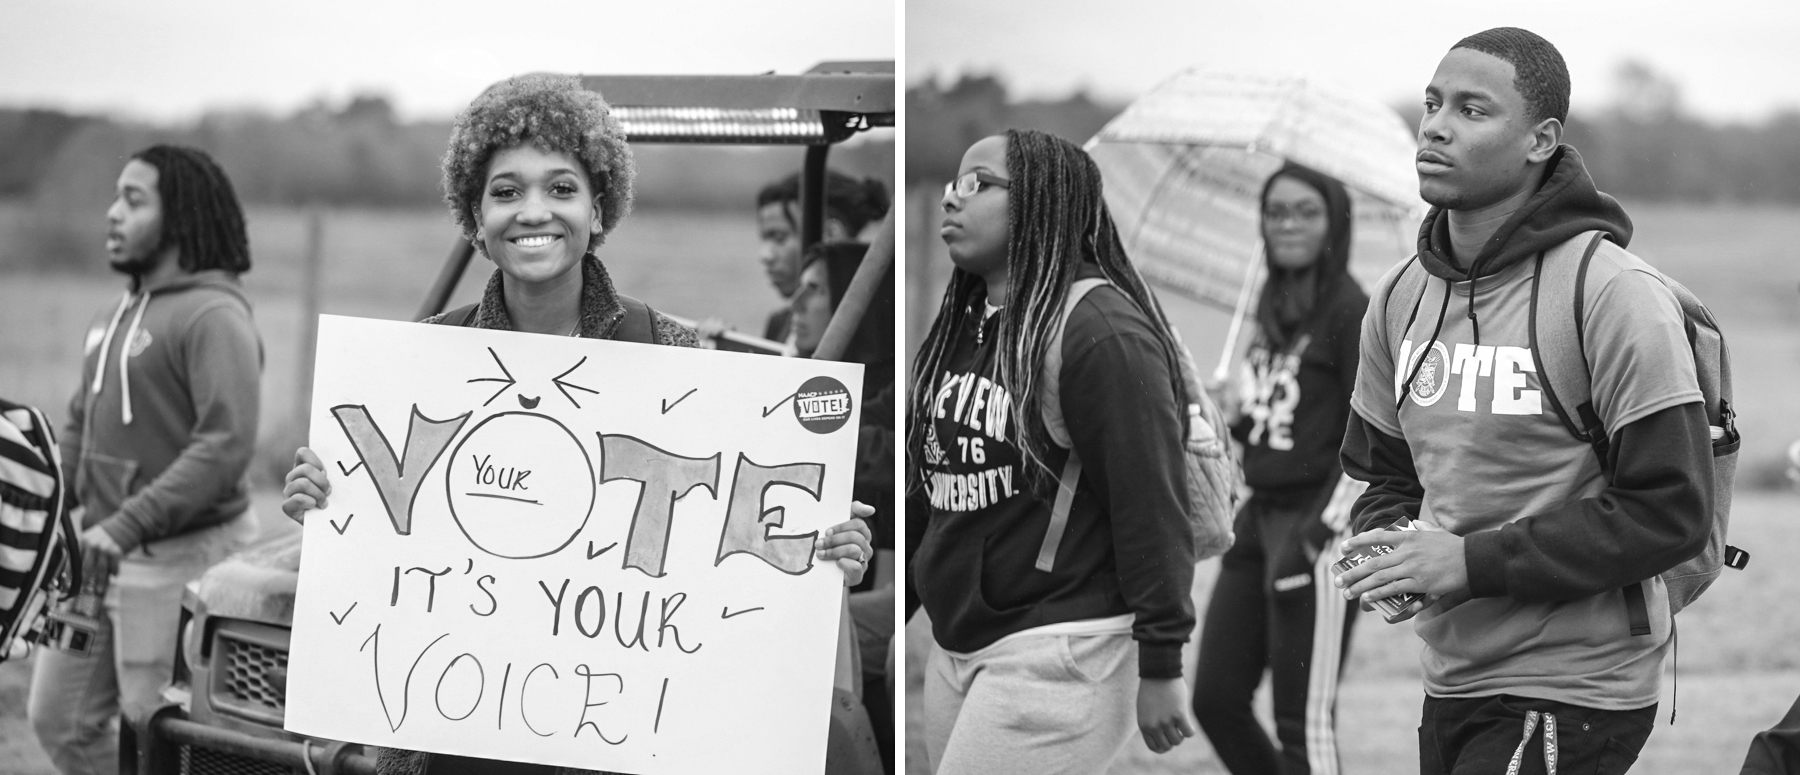 Student Marchers - One with Vote T-shirt and One with Sign - Your Vote It's Your Voice